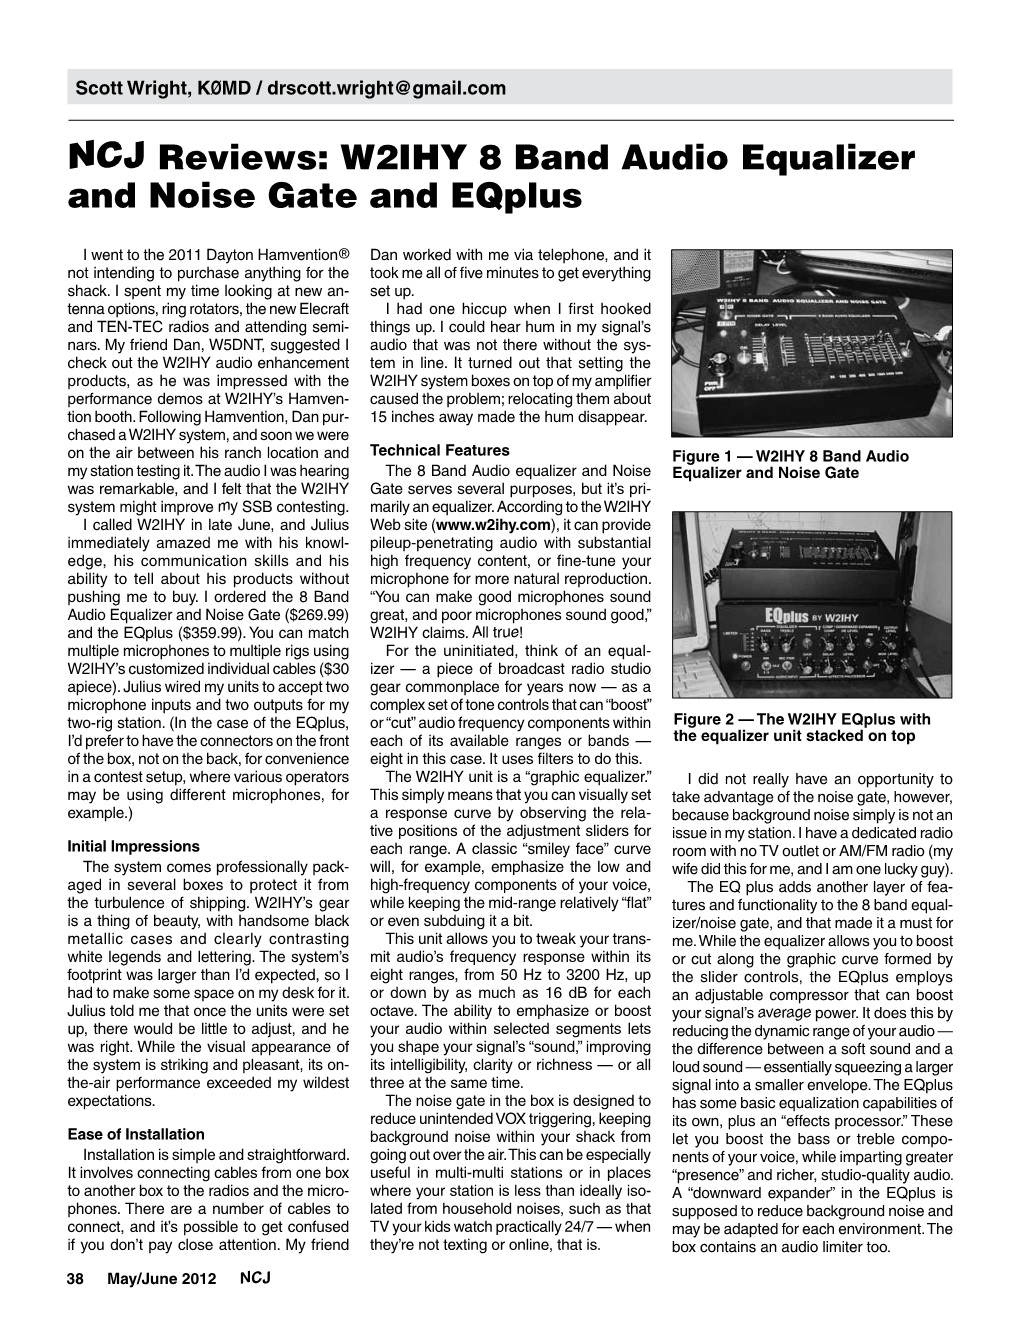 NCJ Reviews: W2IHY 8 Band Audio Equalizer and Noise Gate and Eqplus